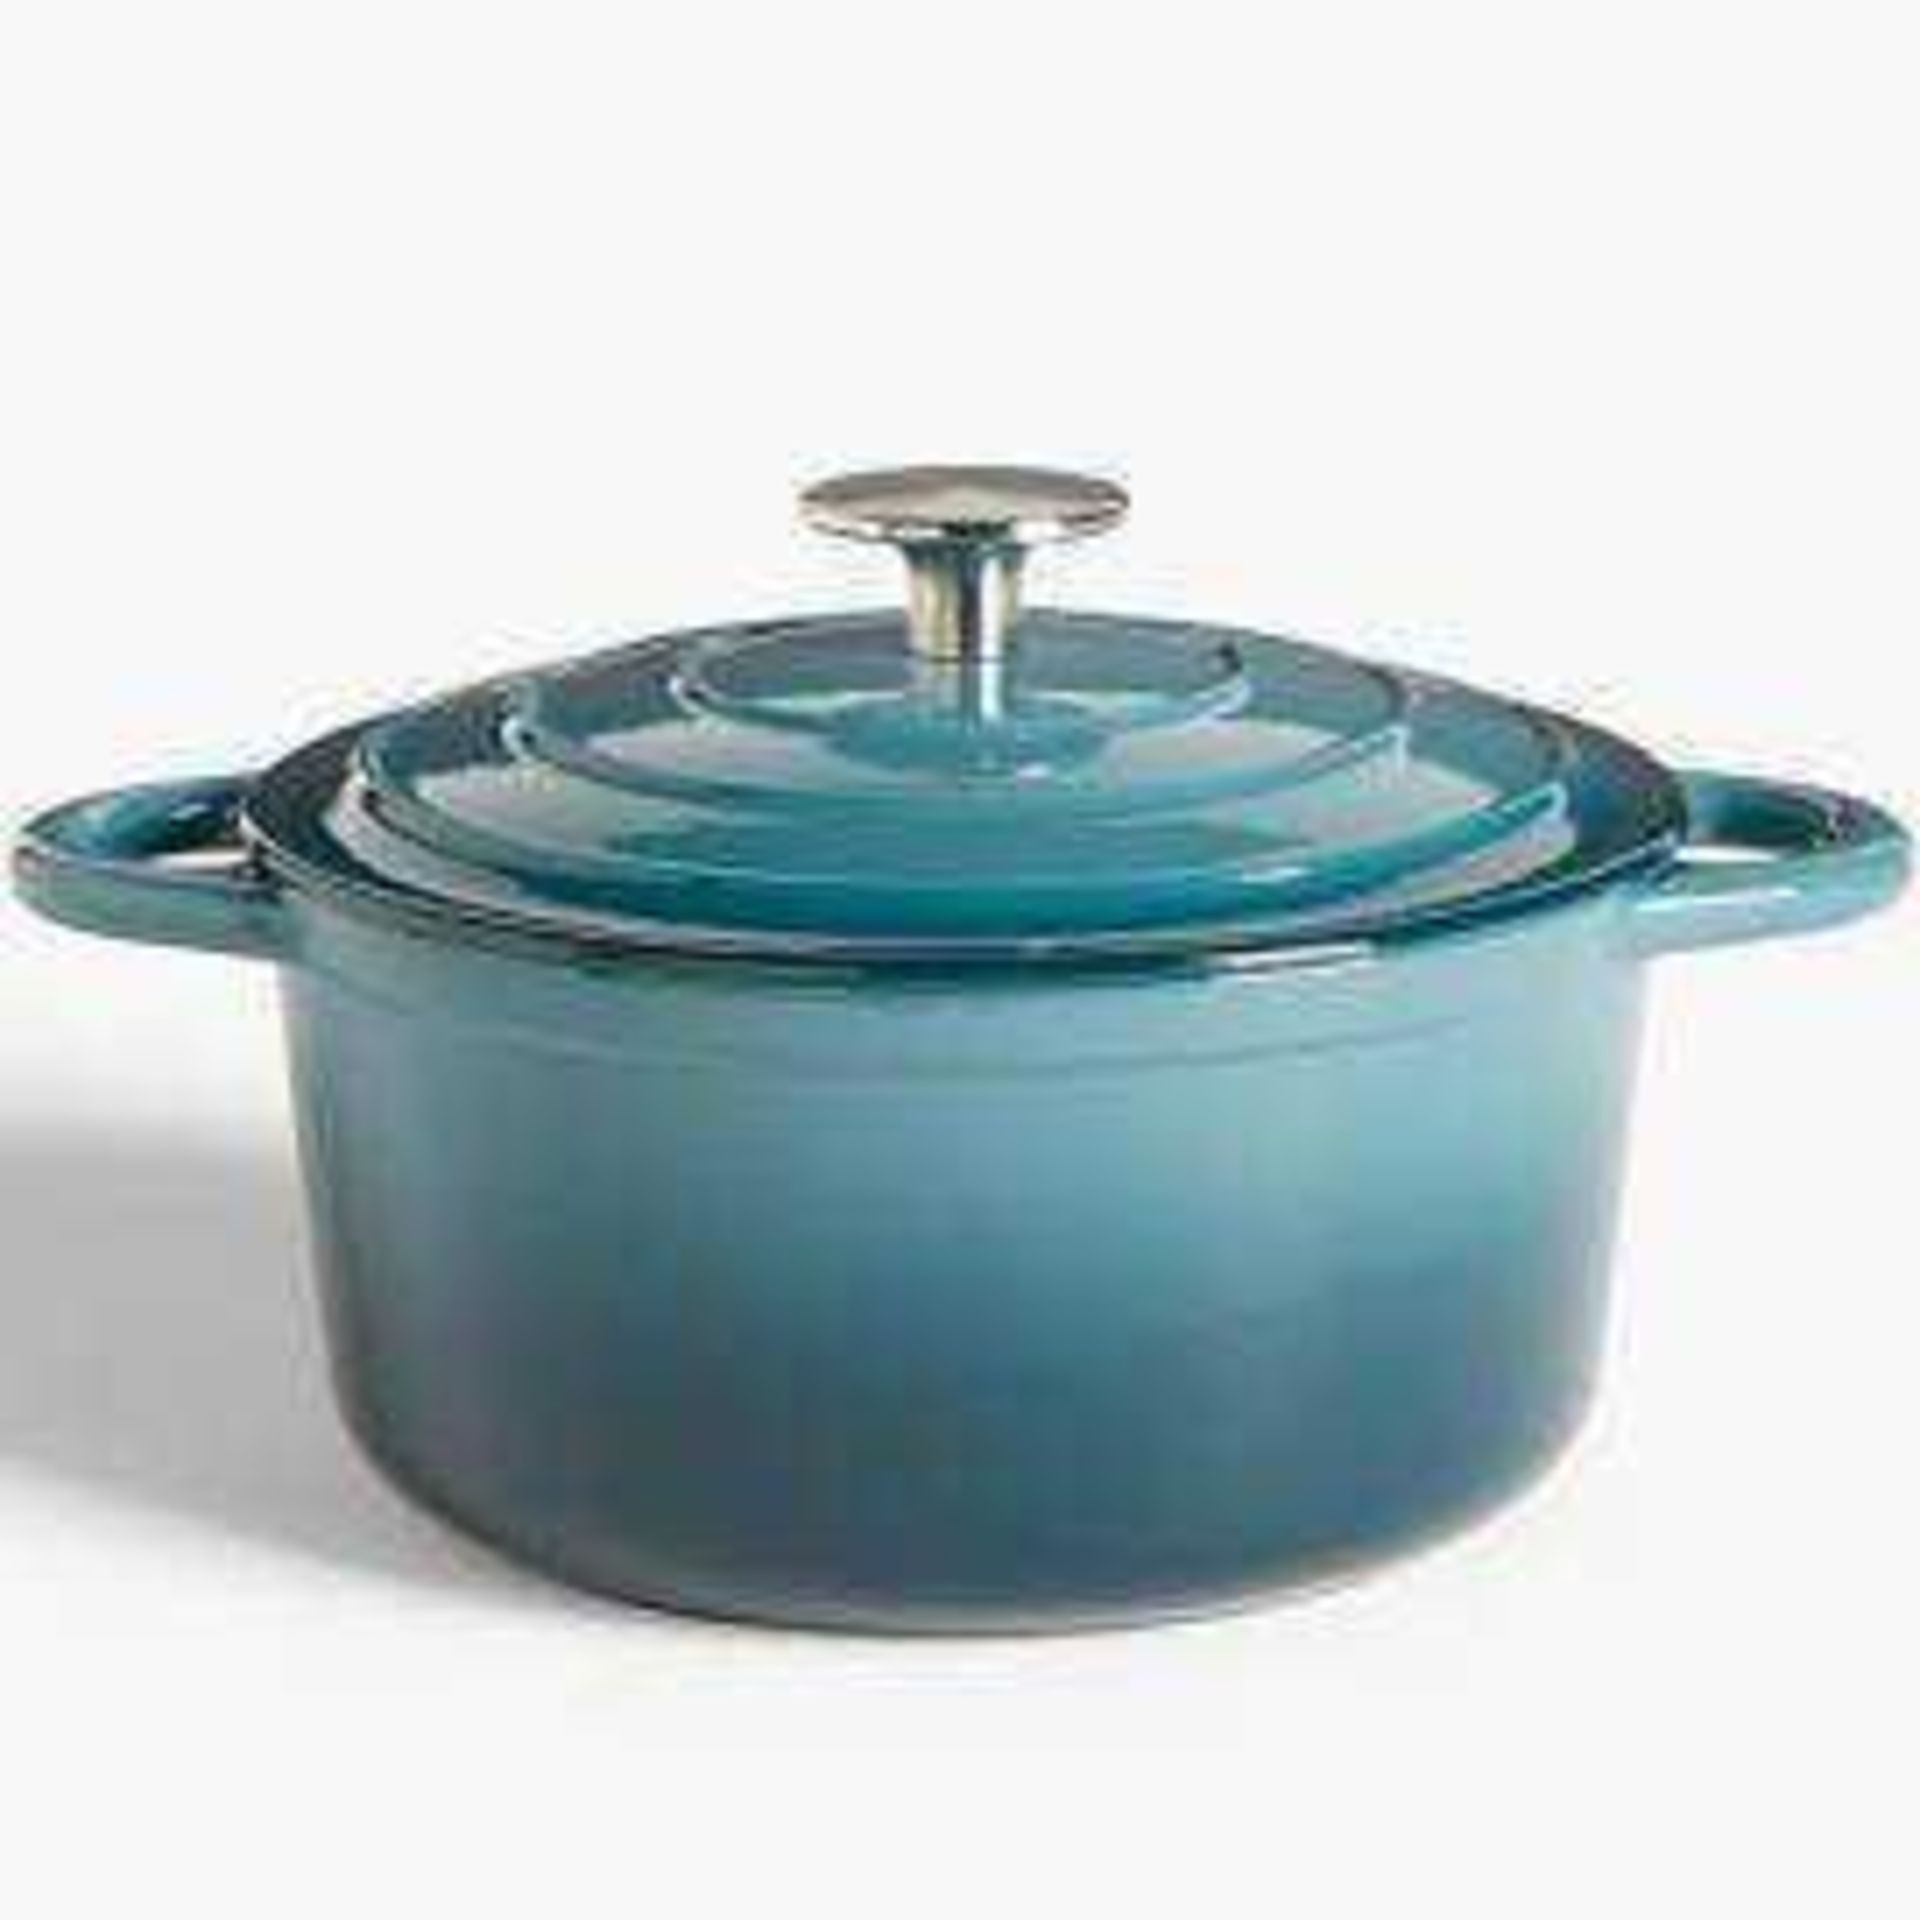 Combined RRP £185 Lot To Contain Three Boxed John Lewis Cast Iron Casserole Dishes With Lids In Size - Image 2 of 3